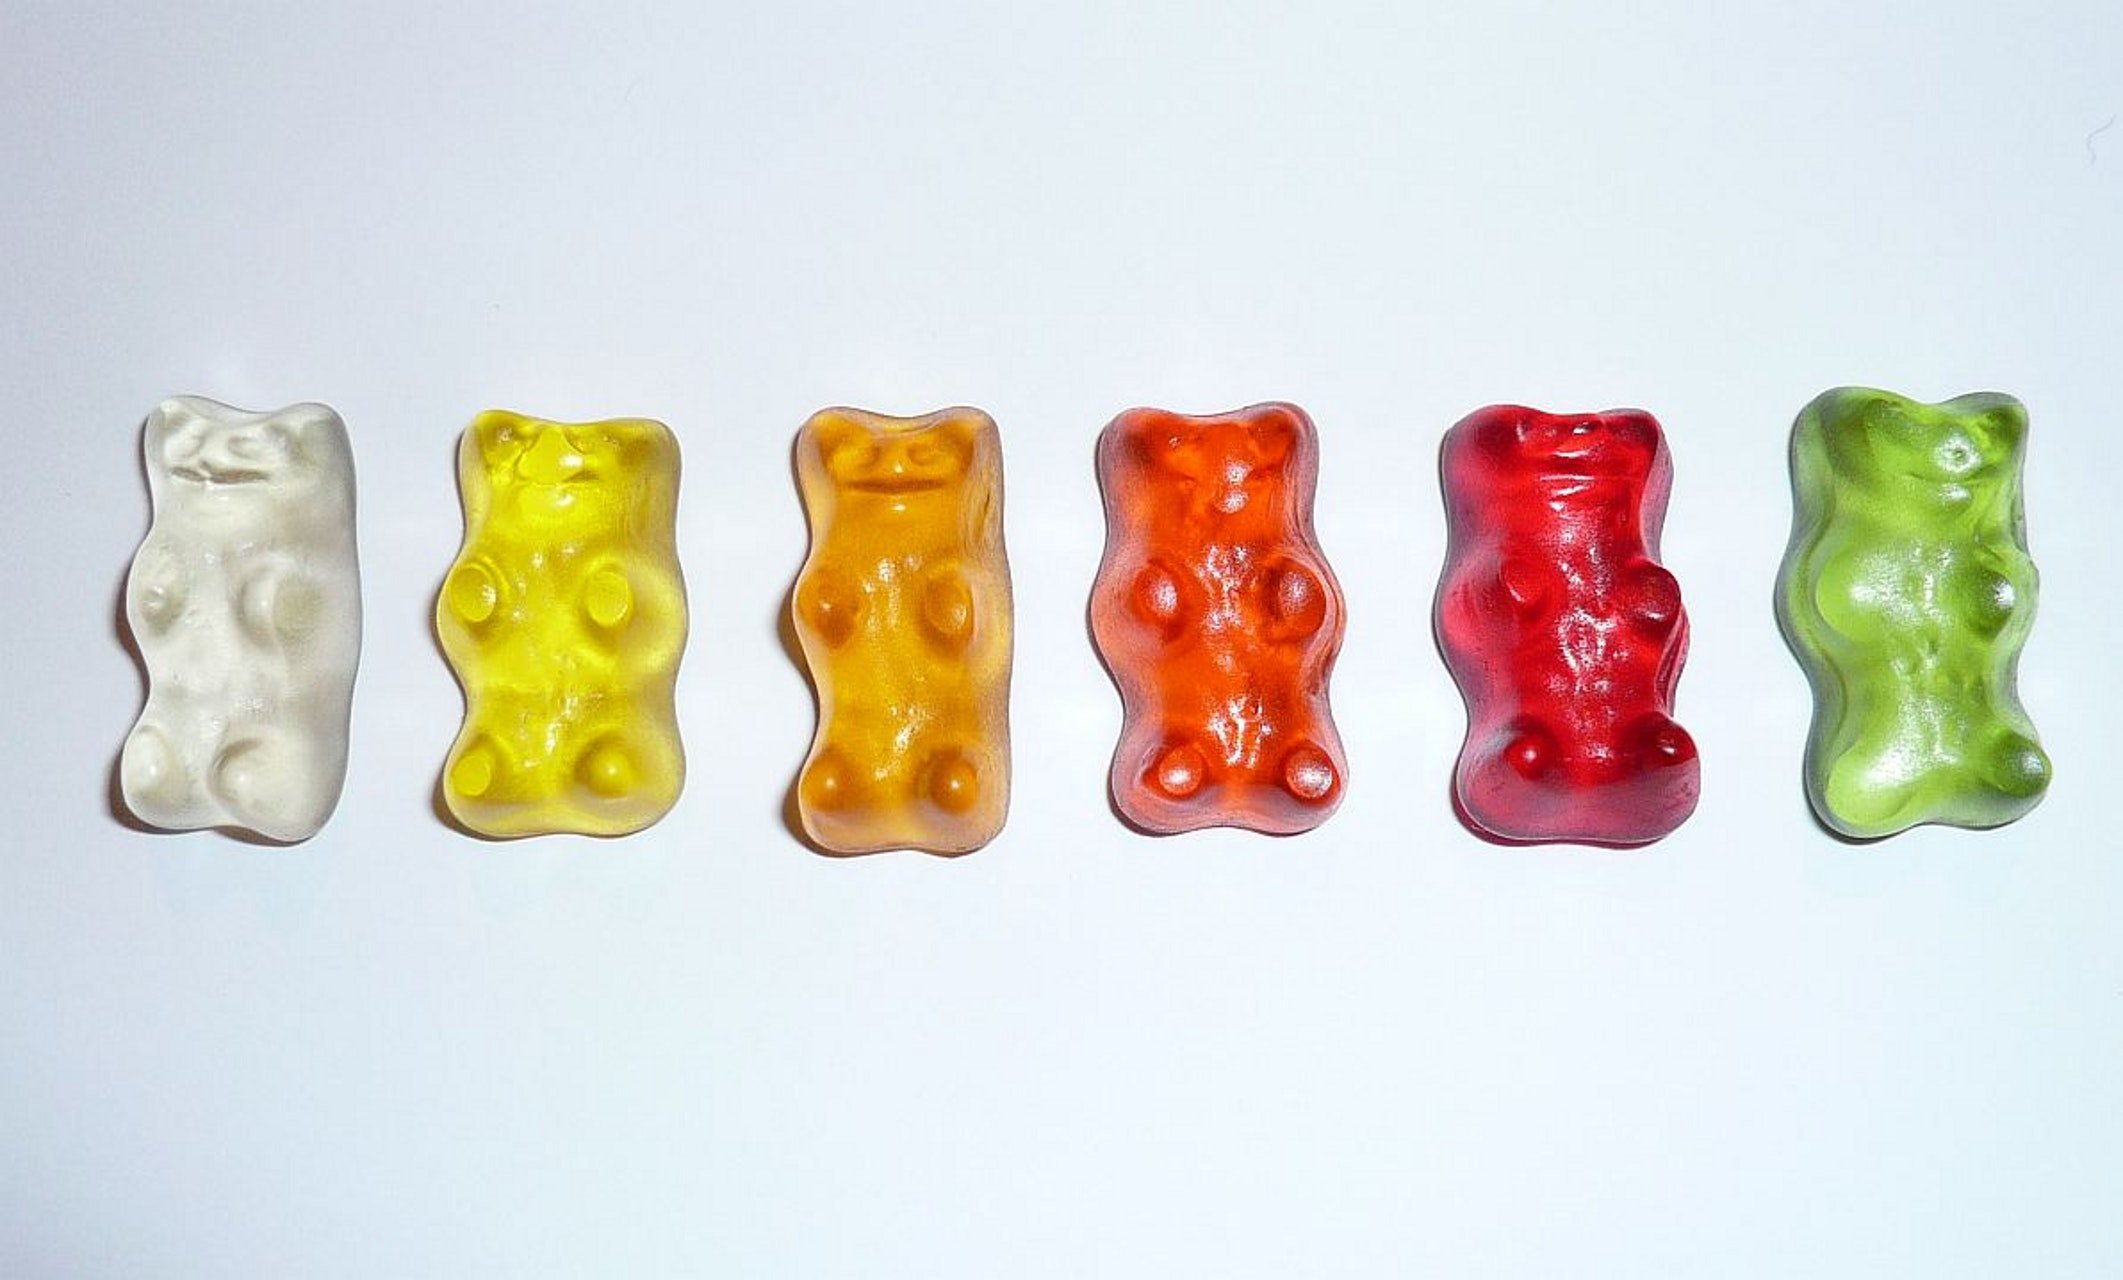 11 Things To Know About Gummy Bears